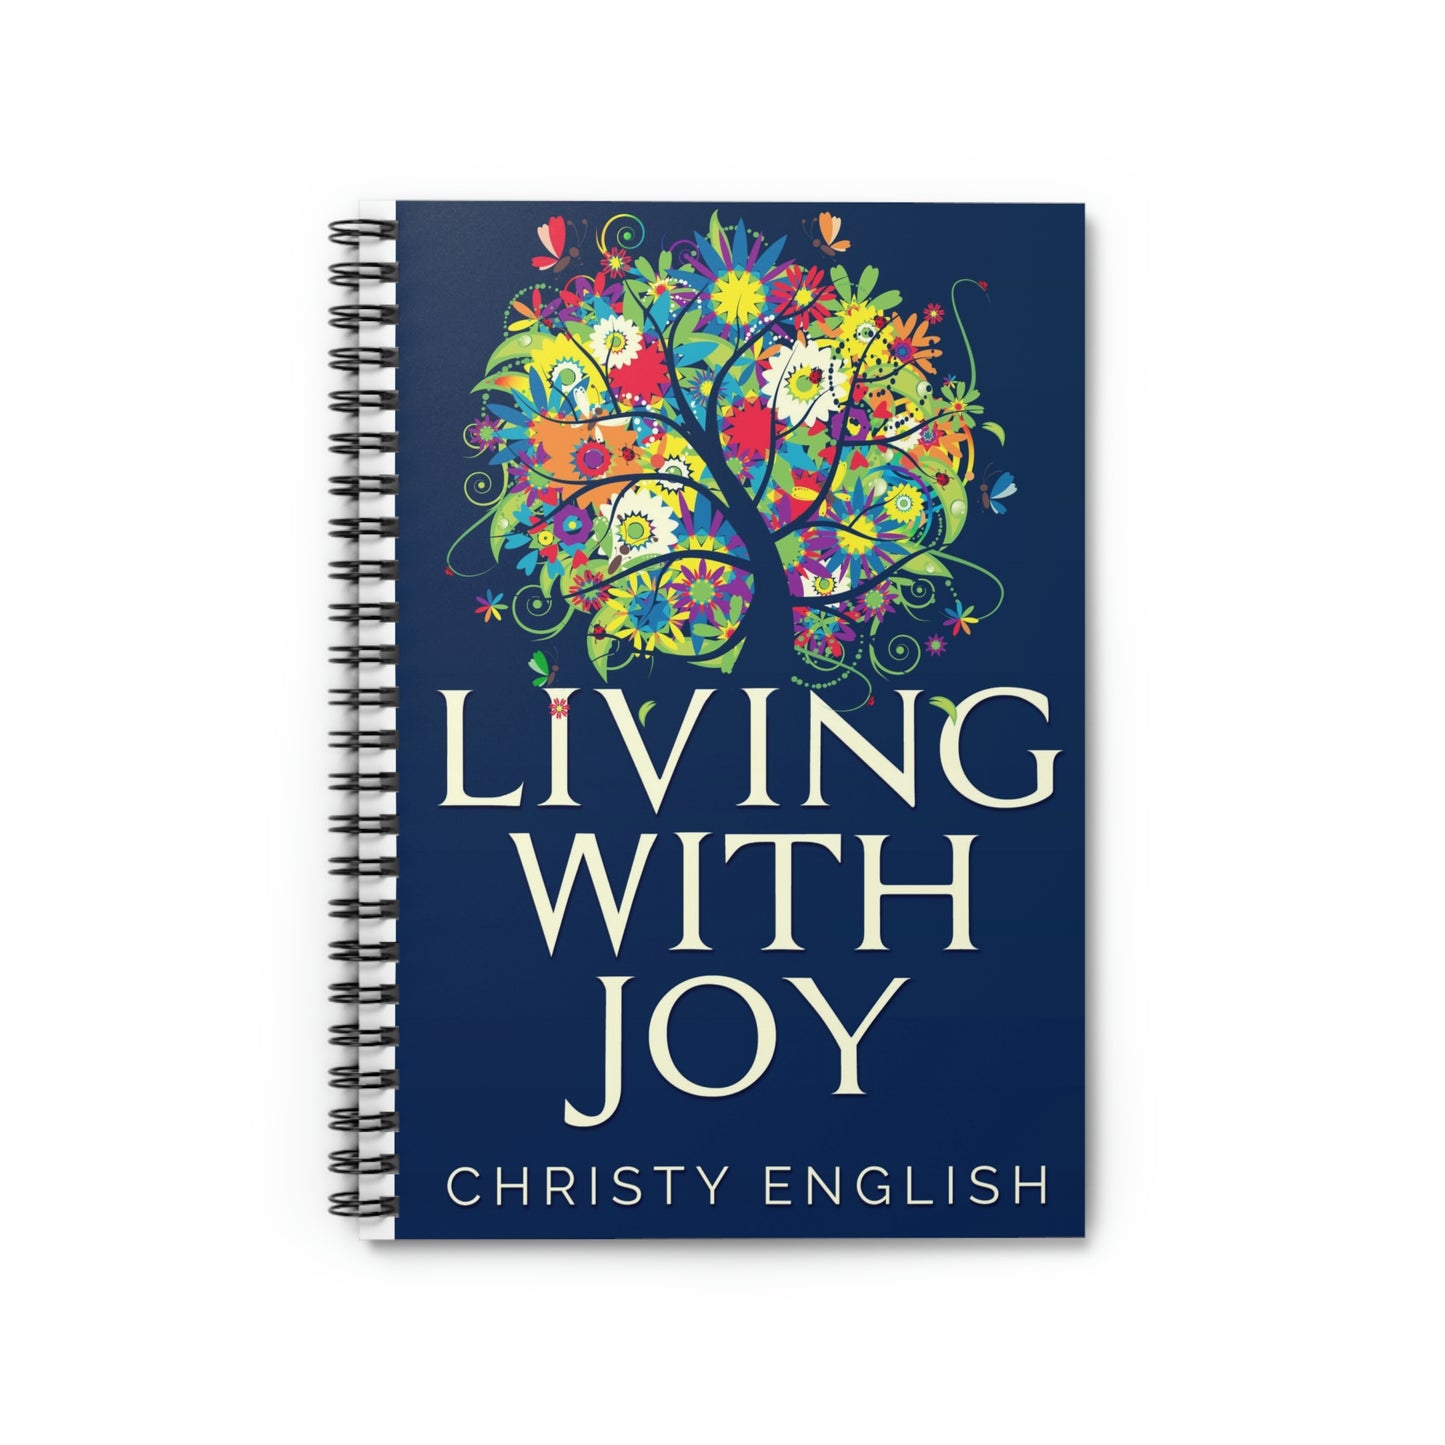 Living With Joy - Spiral Notebook